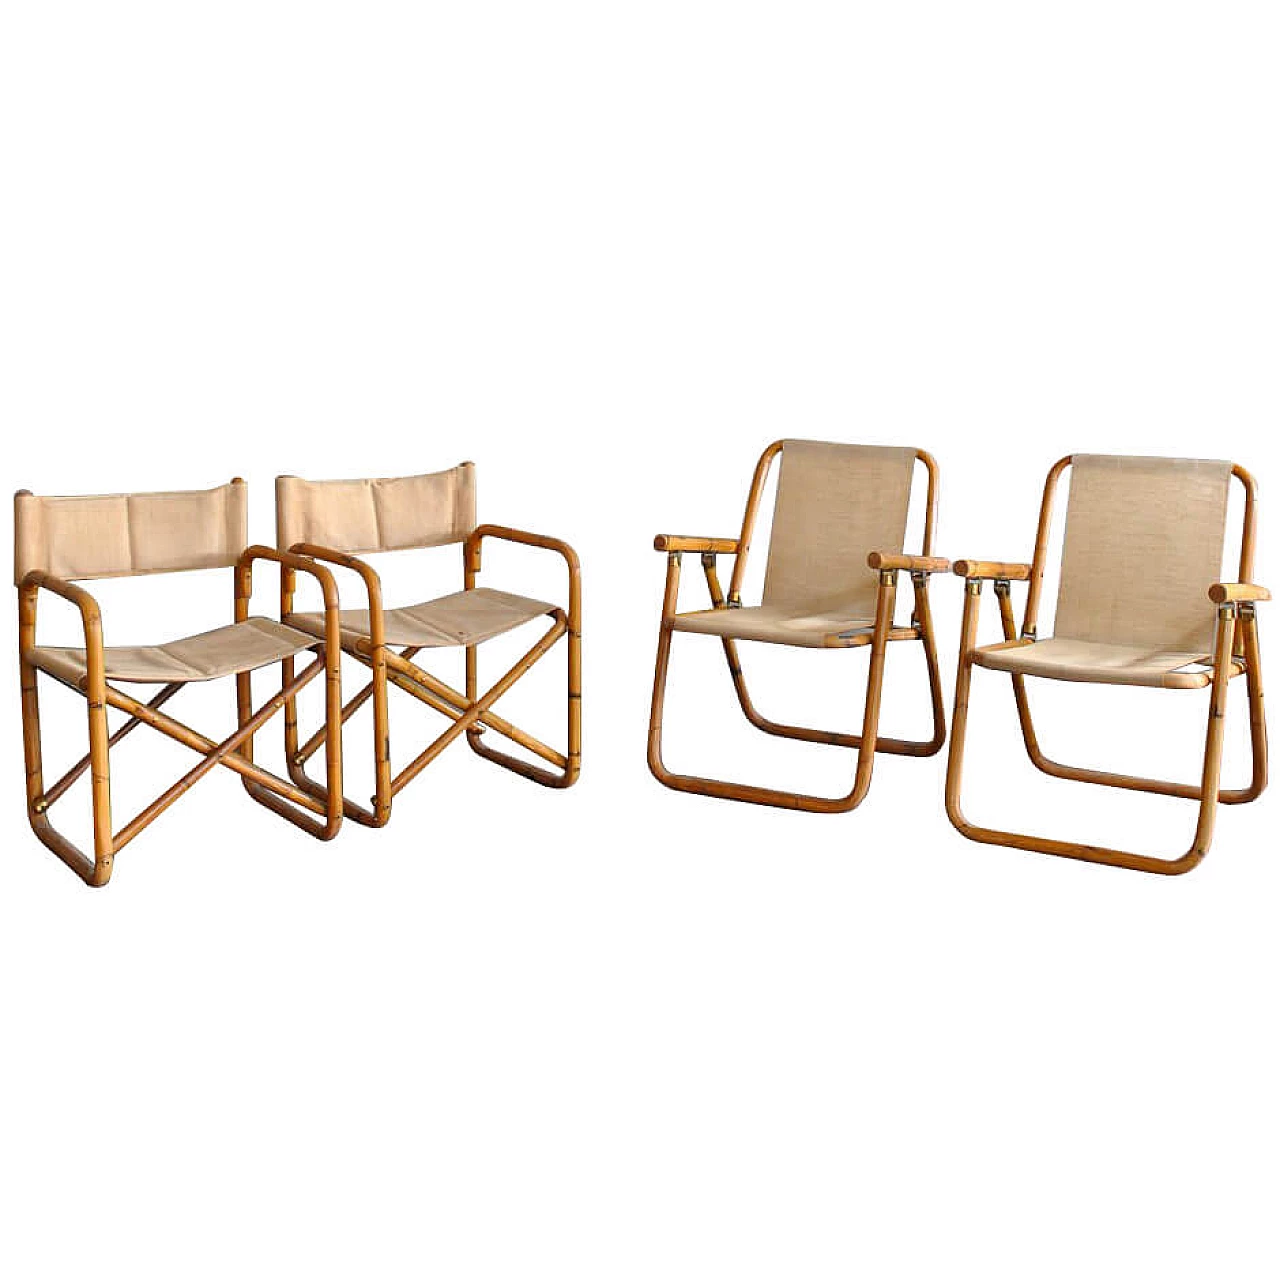 4 Chairs in bamboo cane and hemp with hinges and brass details by Gabriella Crespi, 60s 1306472